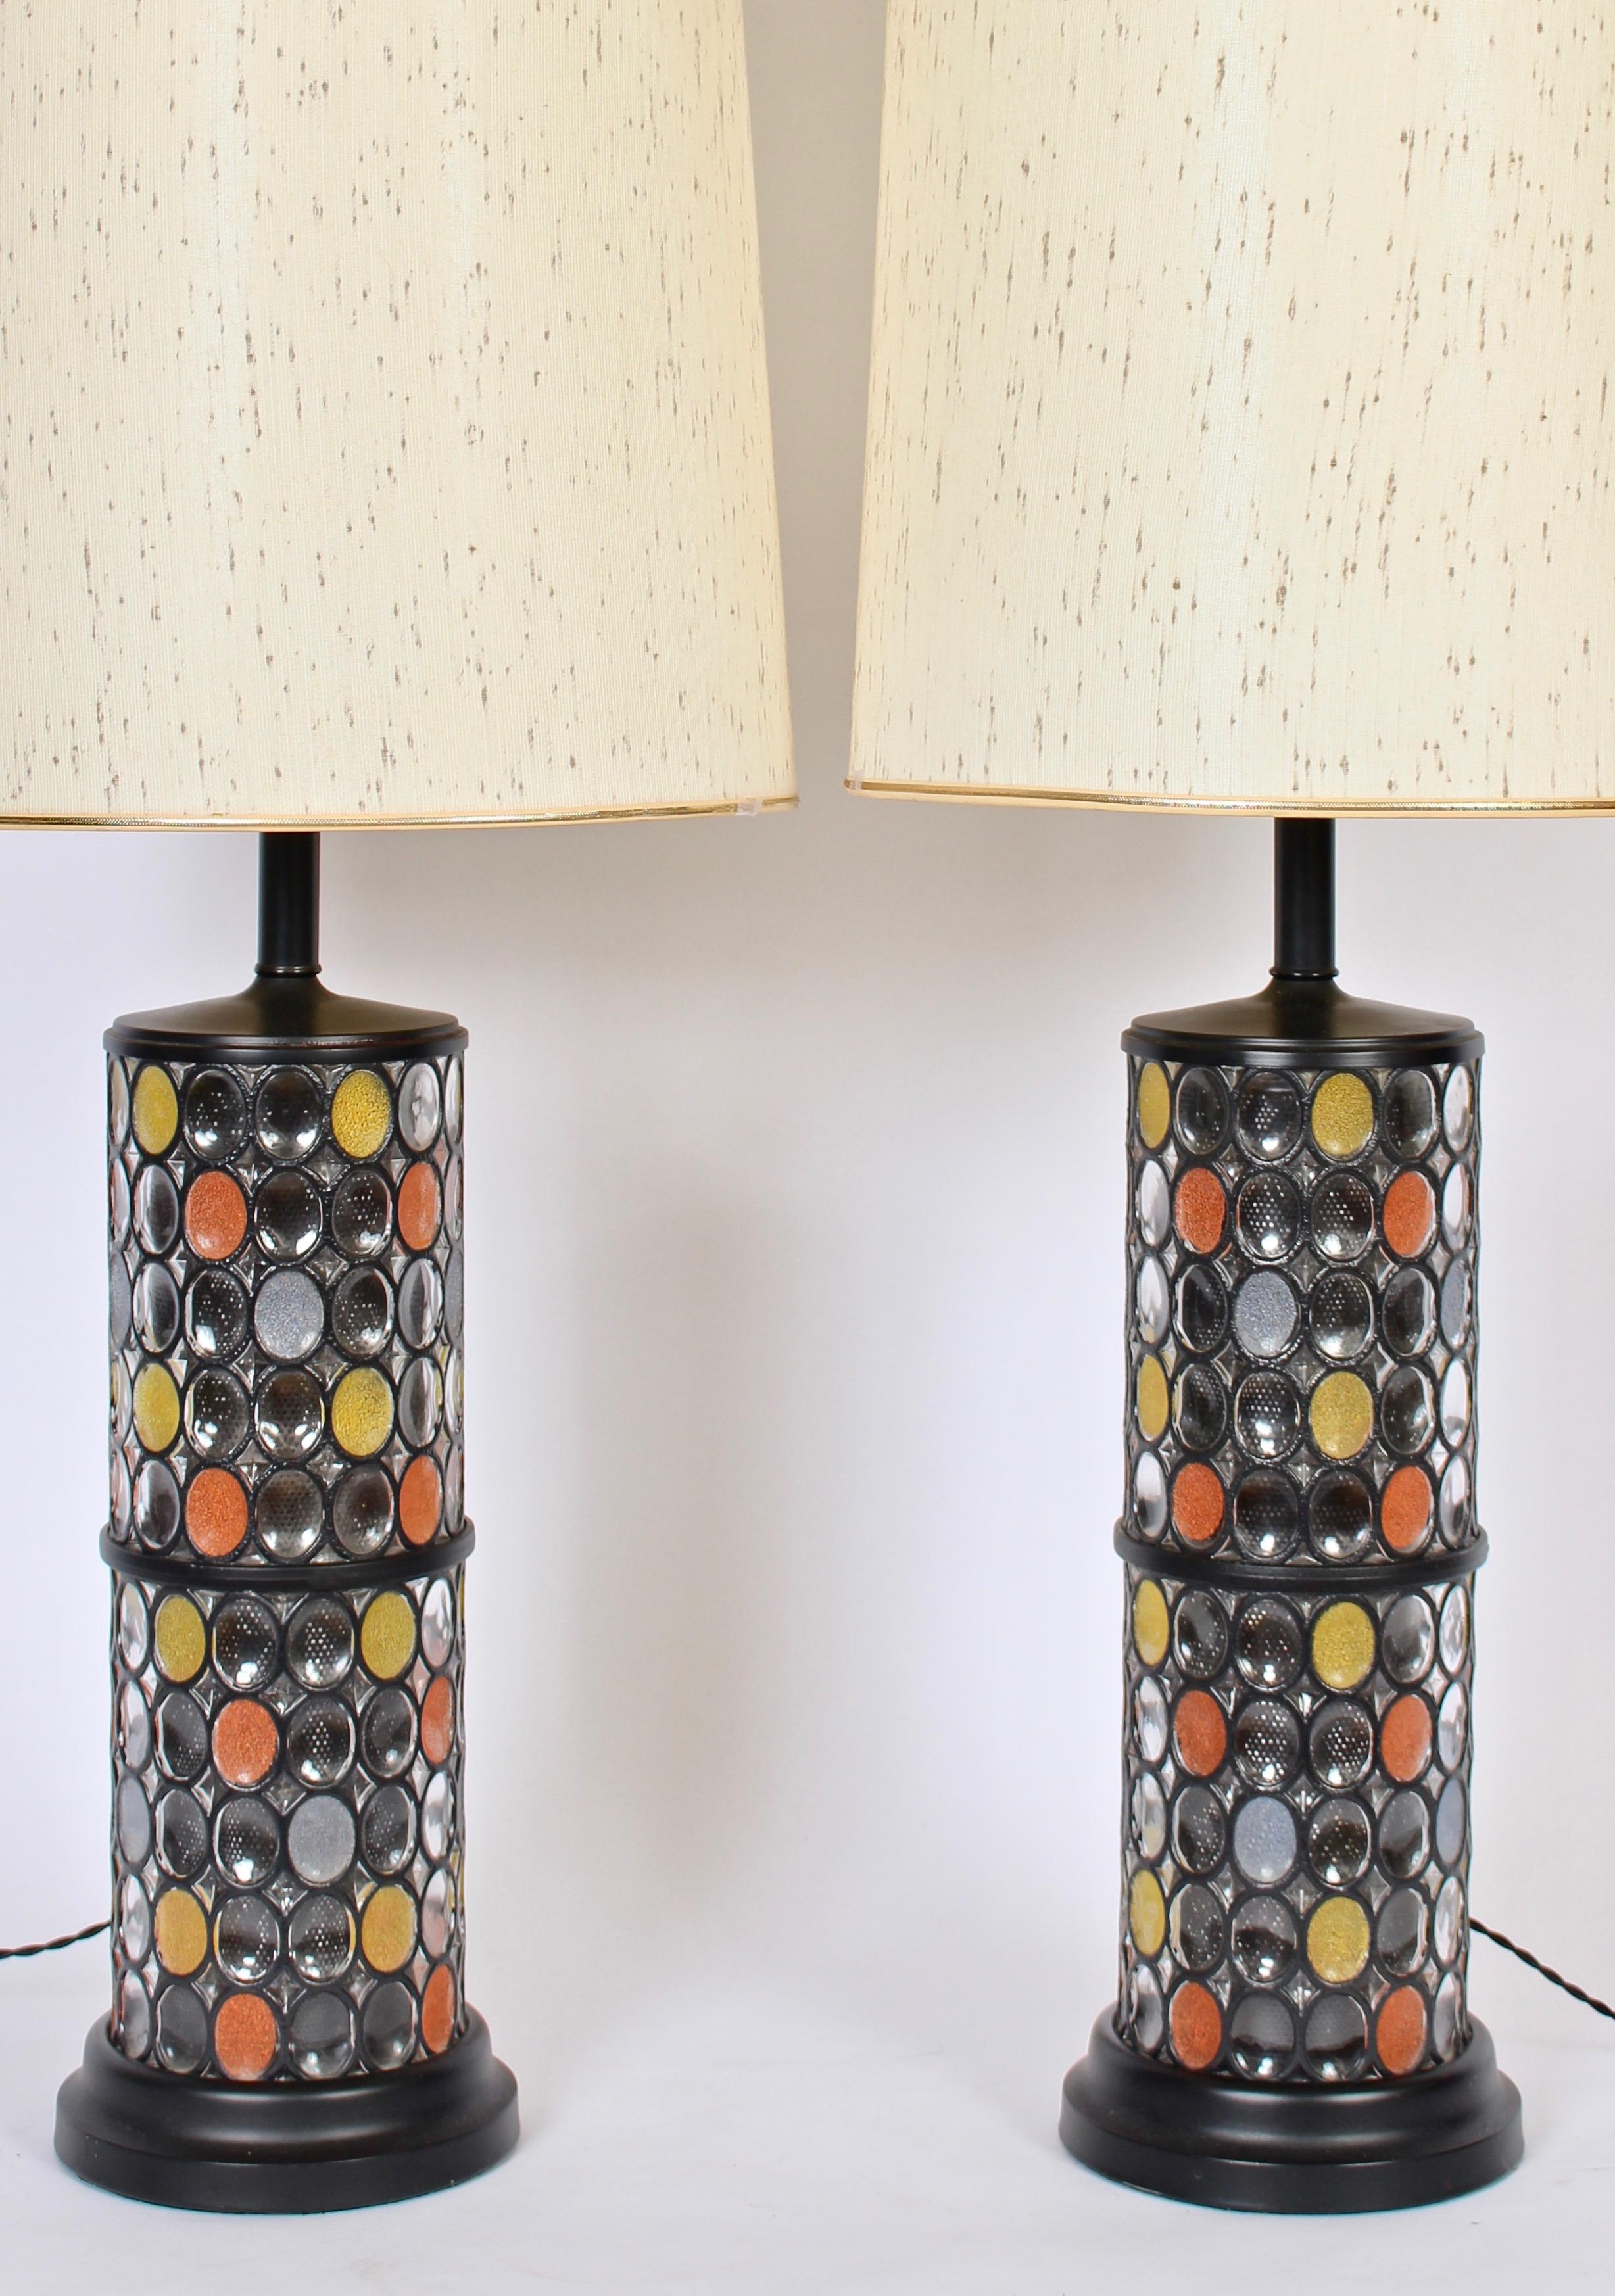 Substantial 3' H pair of black enameled metal and colorful glass table lamps in the manner of Higgins glass studio. Lamps feature a lantern form with interior cylindrical black screen insert. Surround detailed with clear and ovoid granulated glass